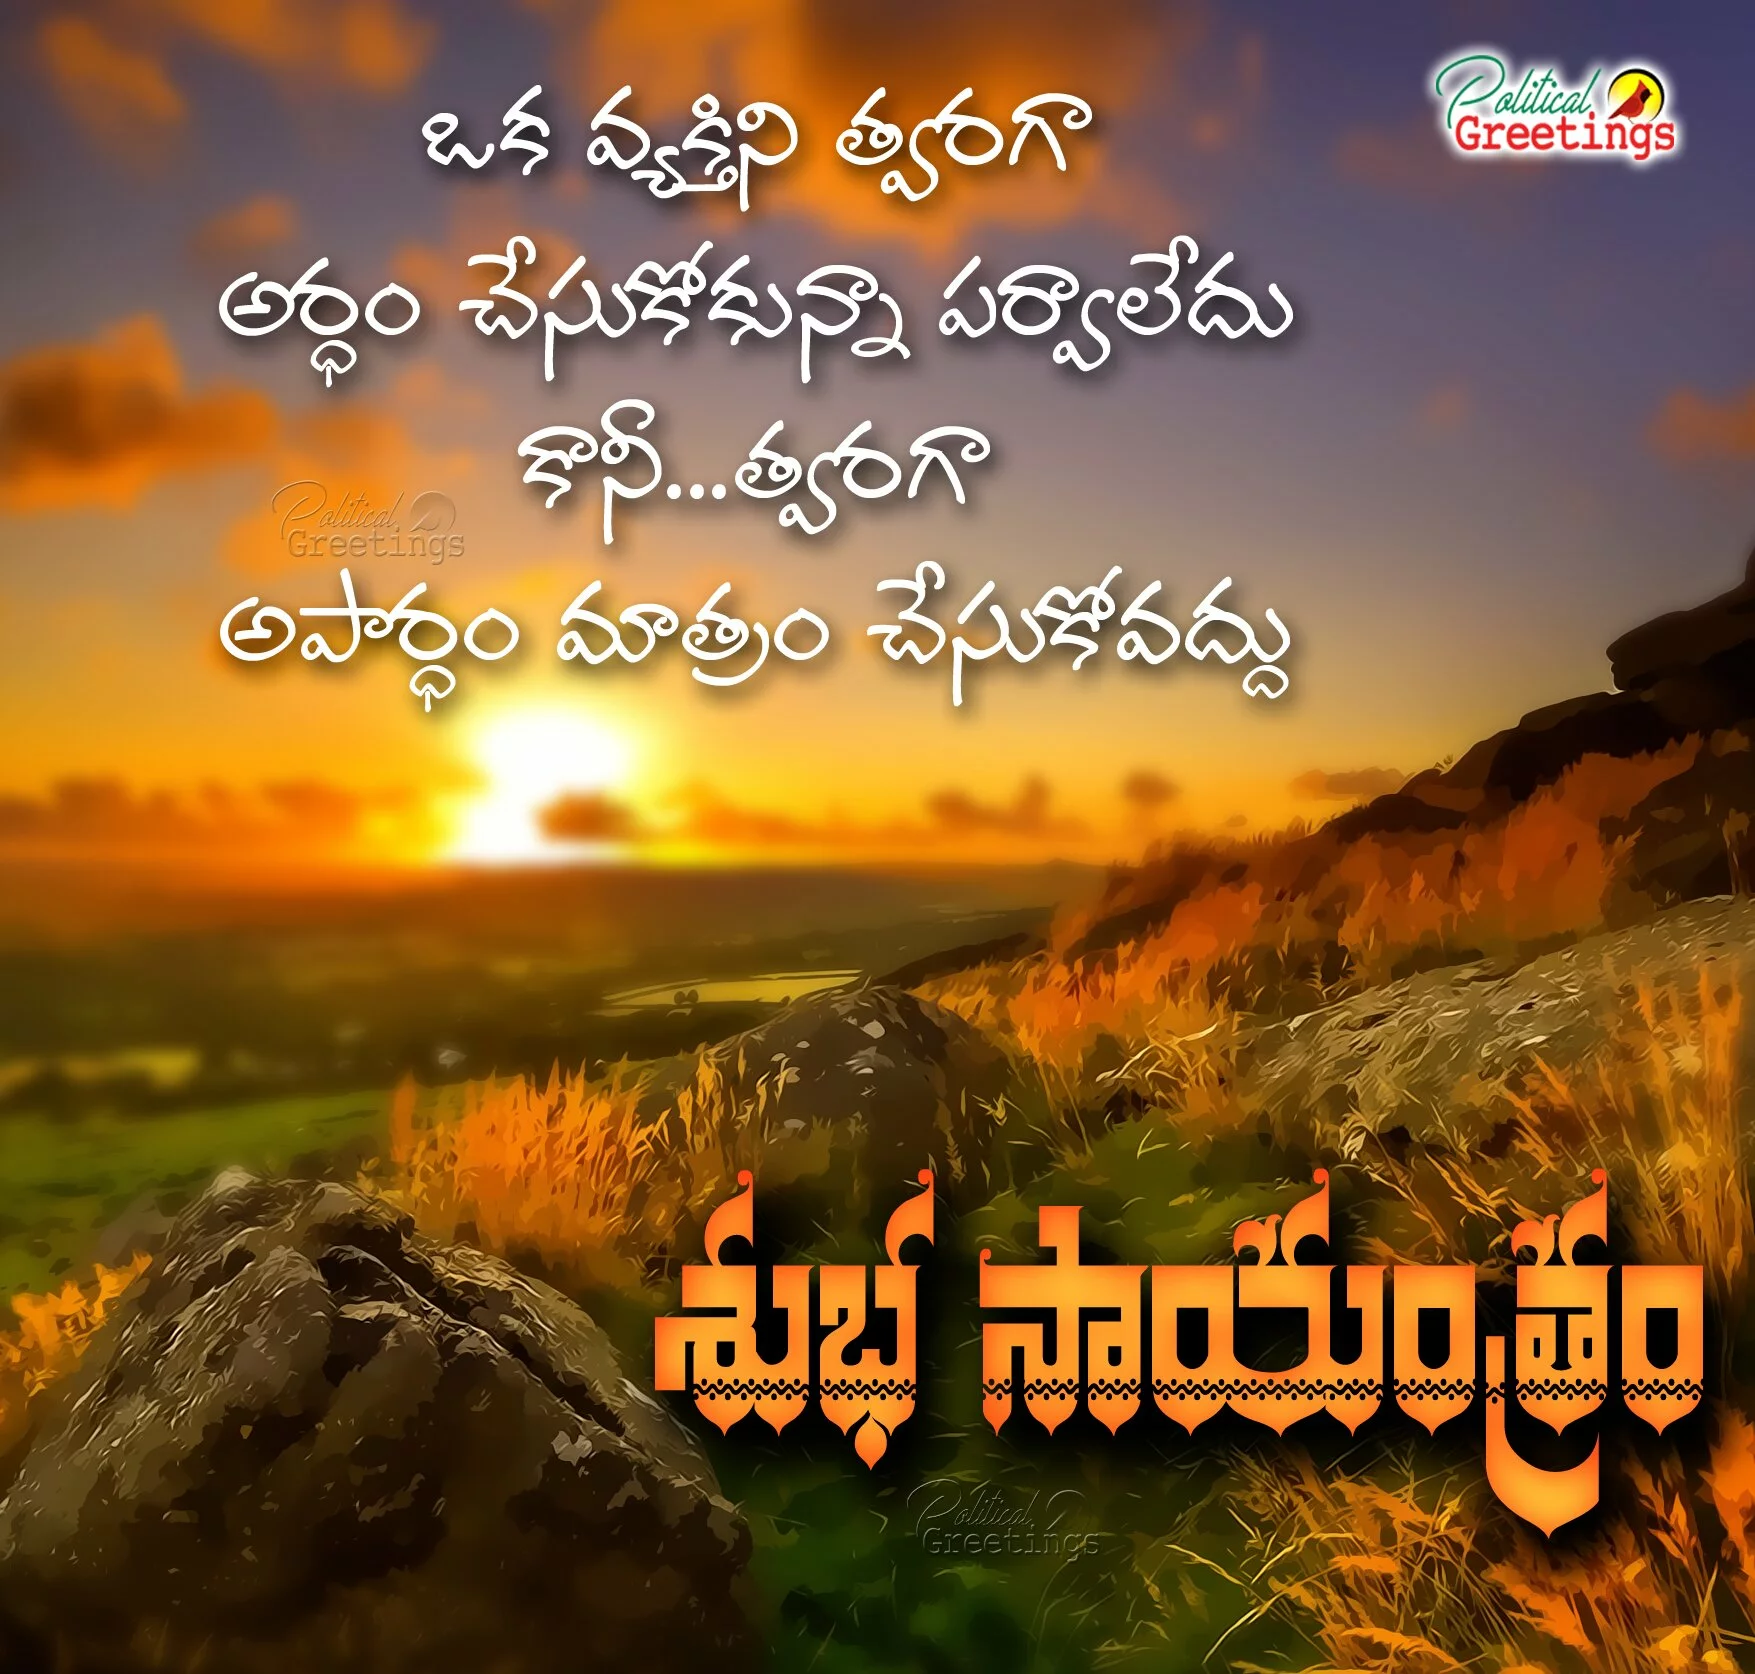 Top Good evening Messages Quotes in telugu-Subhasayantram quotes messages in telugu